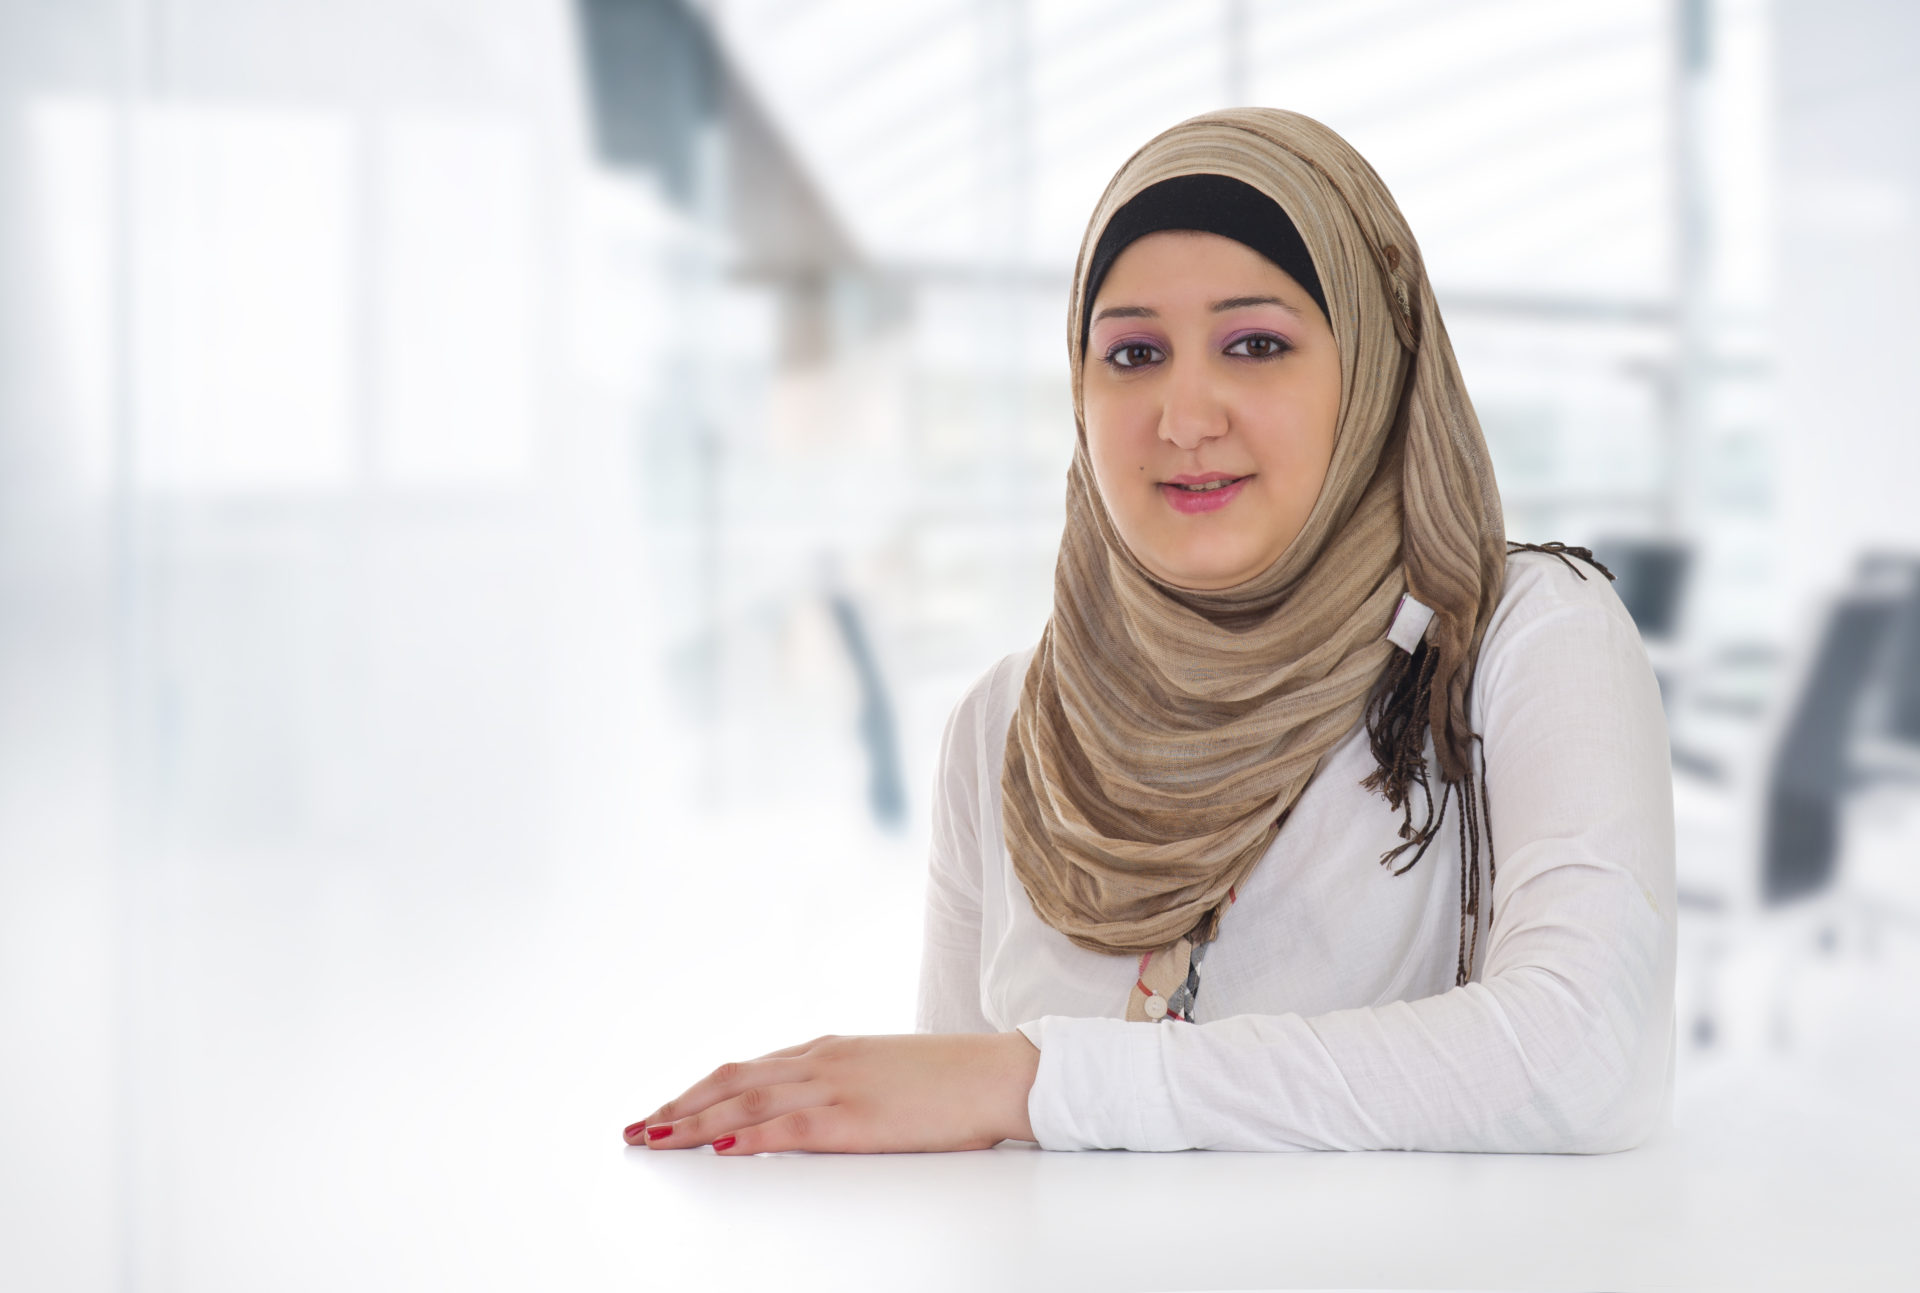 Help! I’m a non-Muslim woman – is wearing a headscarf a good way to show solidarity with Muslims?